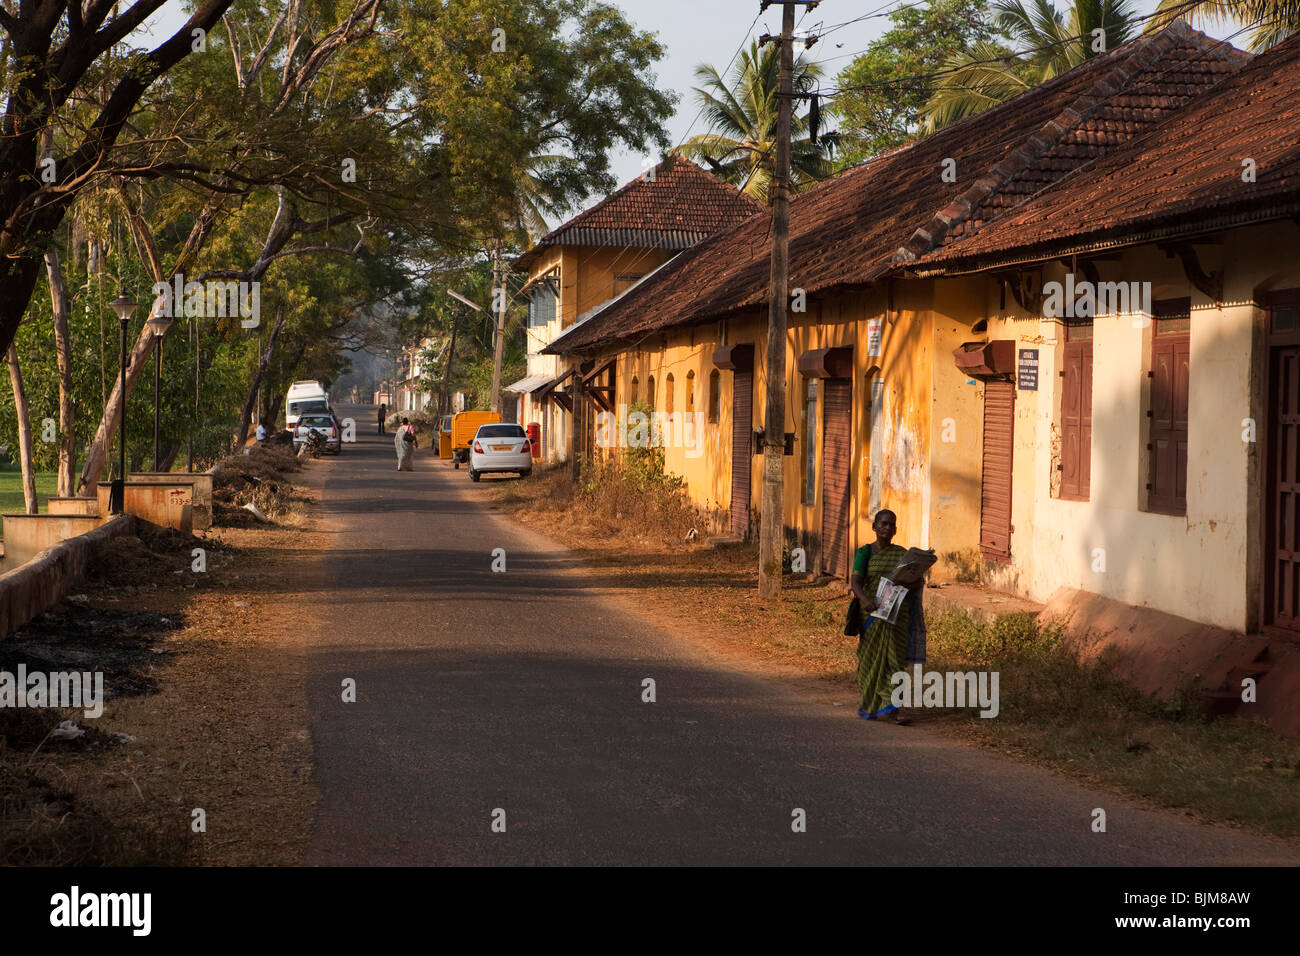 India, Kerala, Alappuzha, (Alleppey), quiet back street in coir-producing district Stock Photo